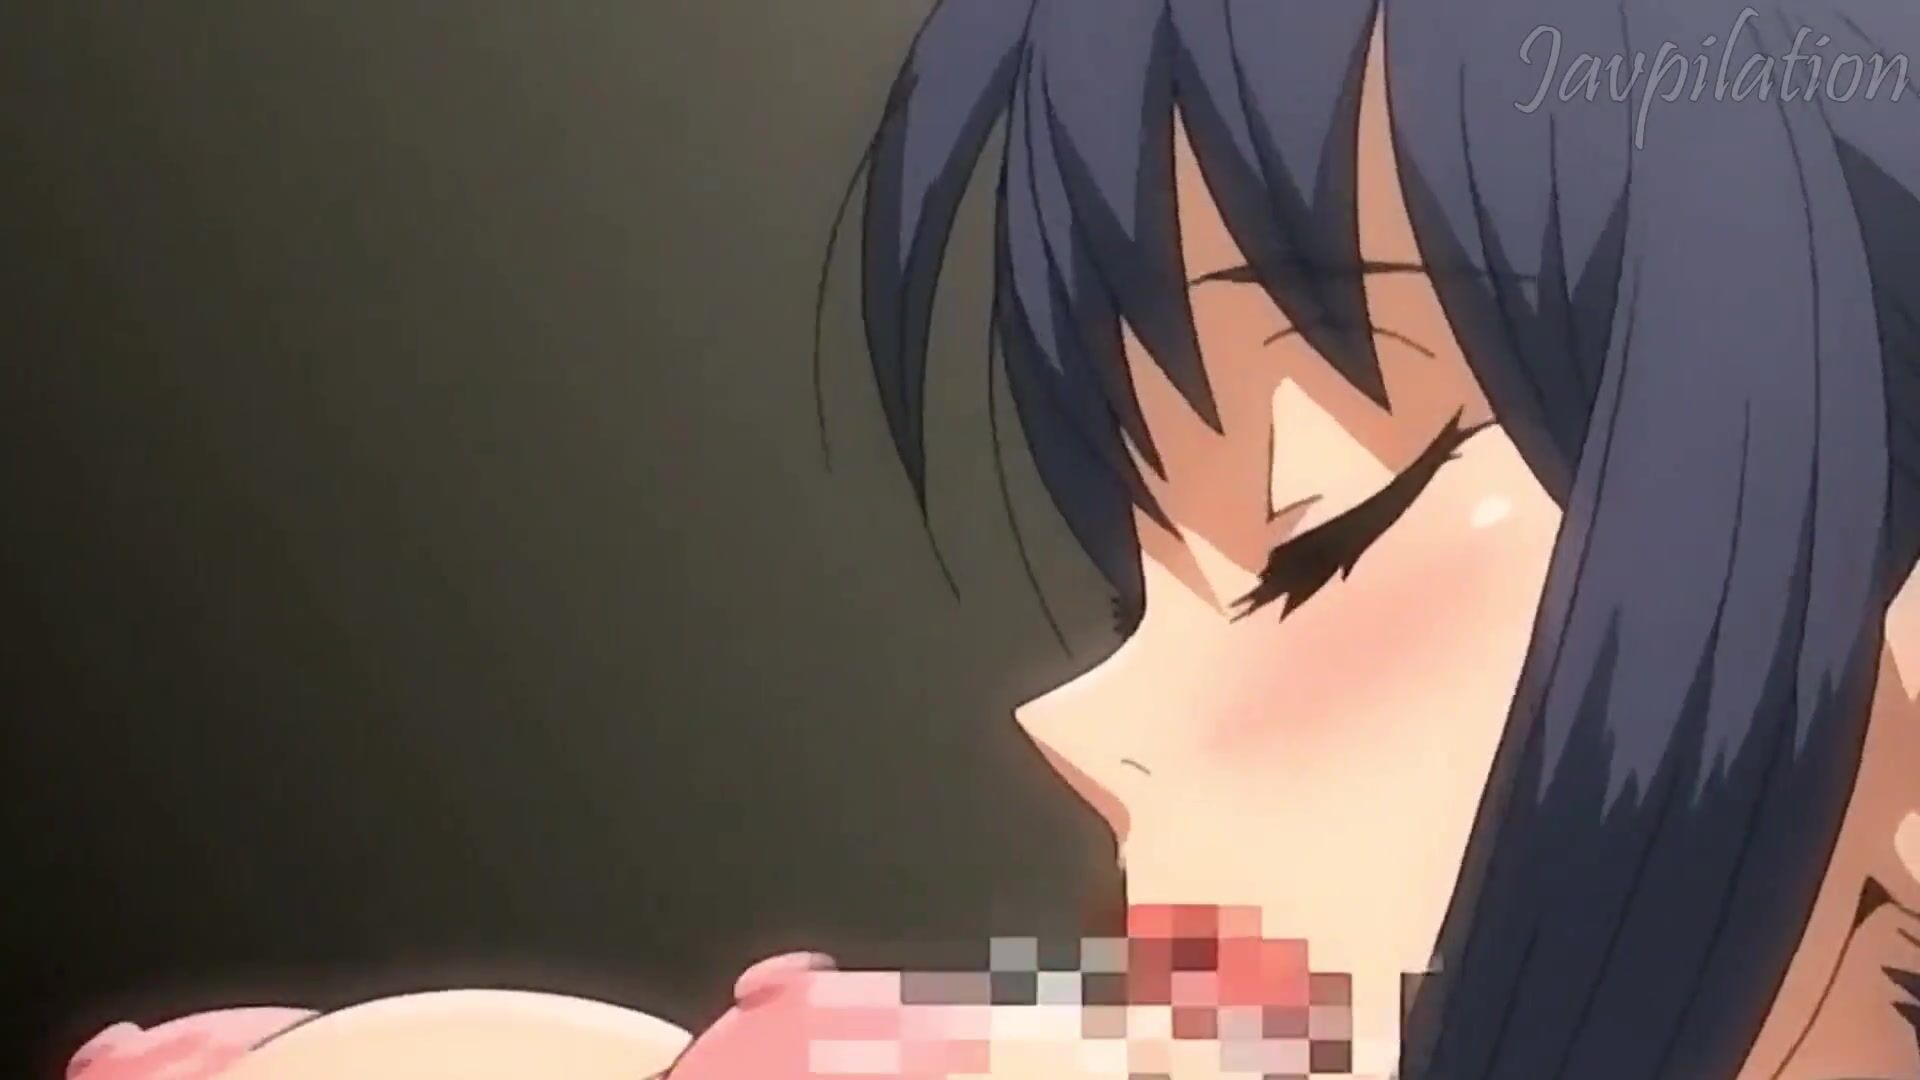 Anime Hentai Stunning Married Woman Cheats on her Husband with Big Creampies watch online image